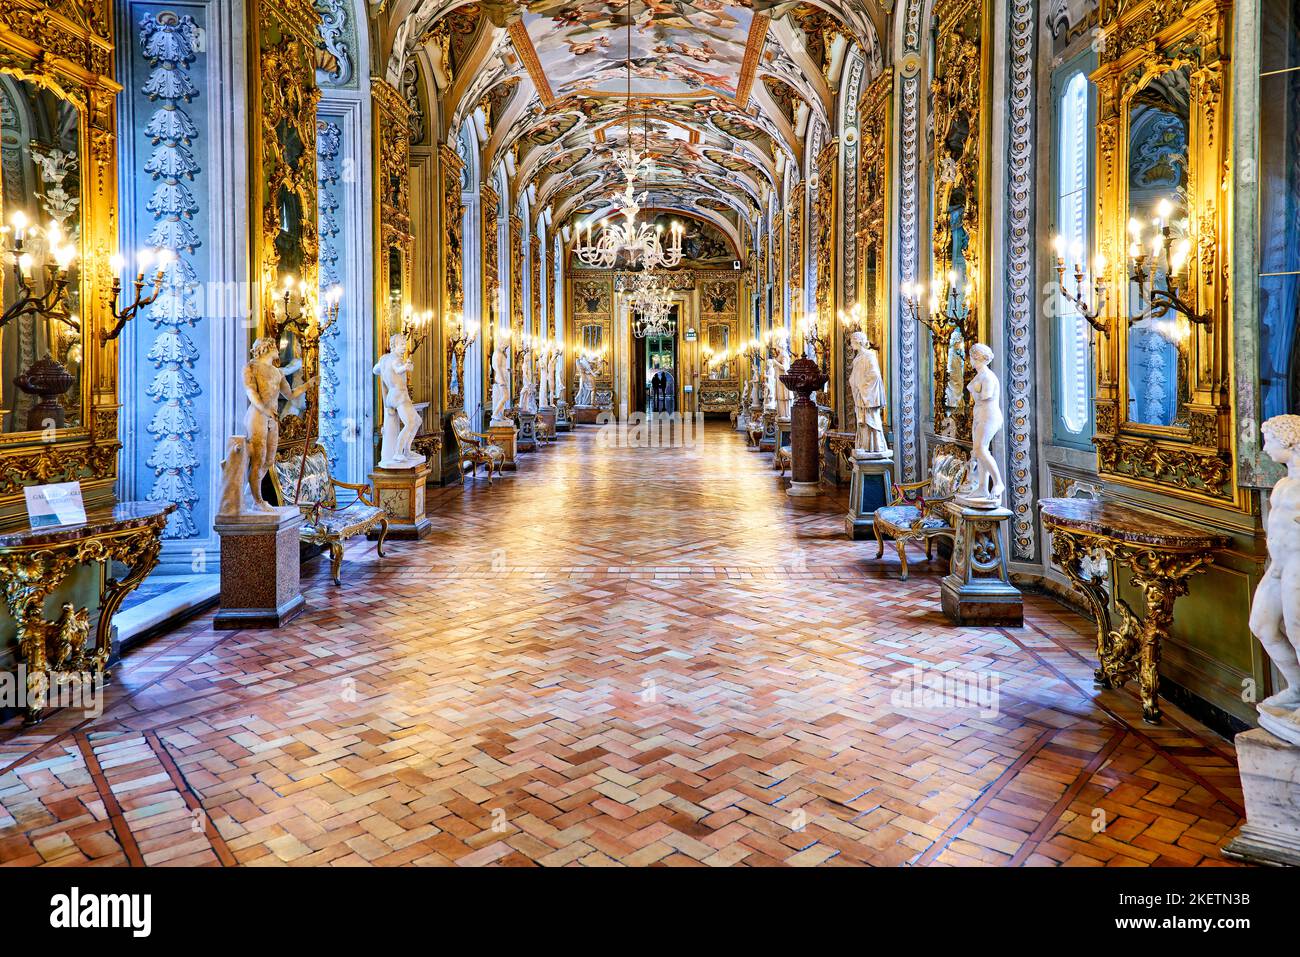 Rome Lazio Italy. The Doria Pamphilj Gallery is a large art collection housed in the Palazzo Doria Pamphilj. Galleria degli specchi (mirrors gallery) Stock Photo